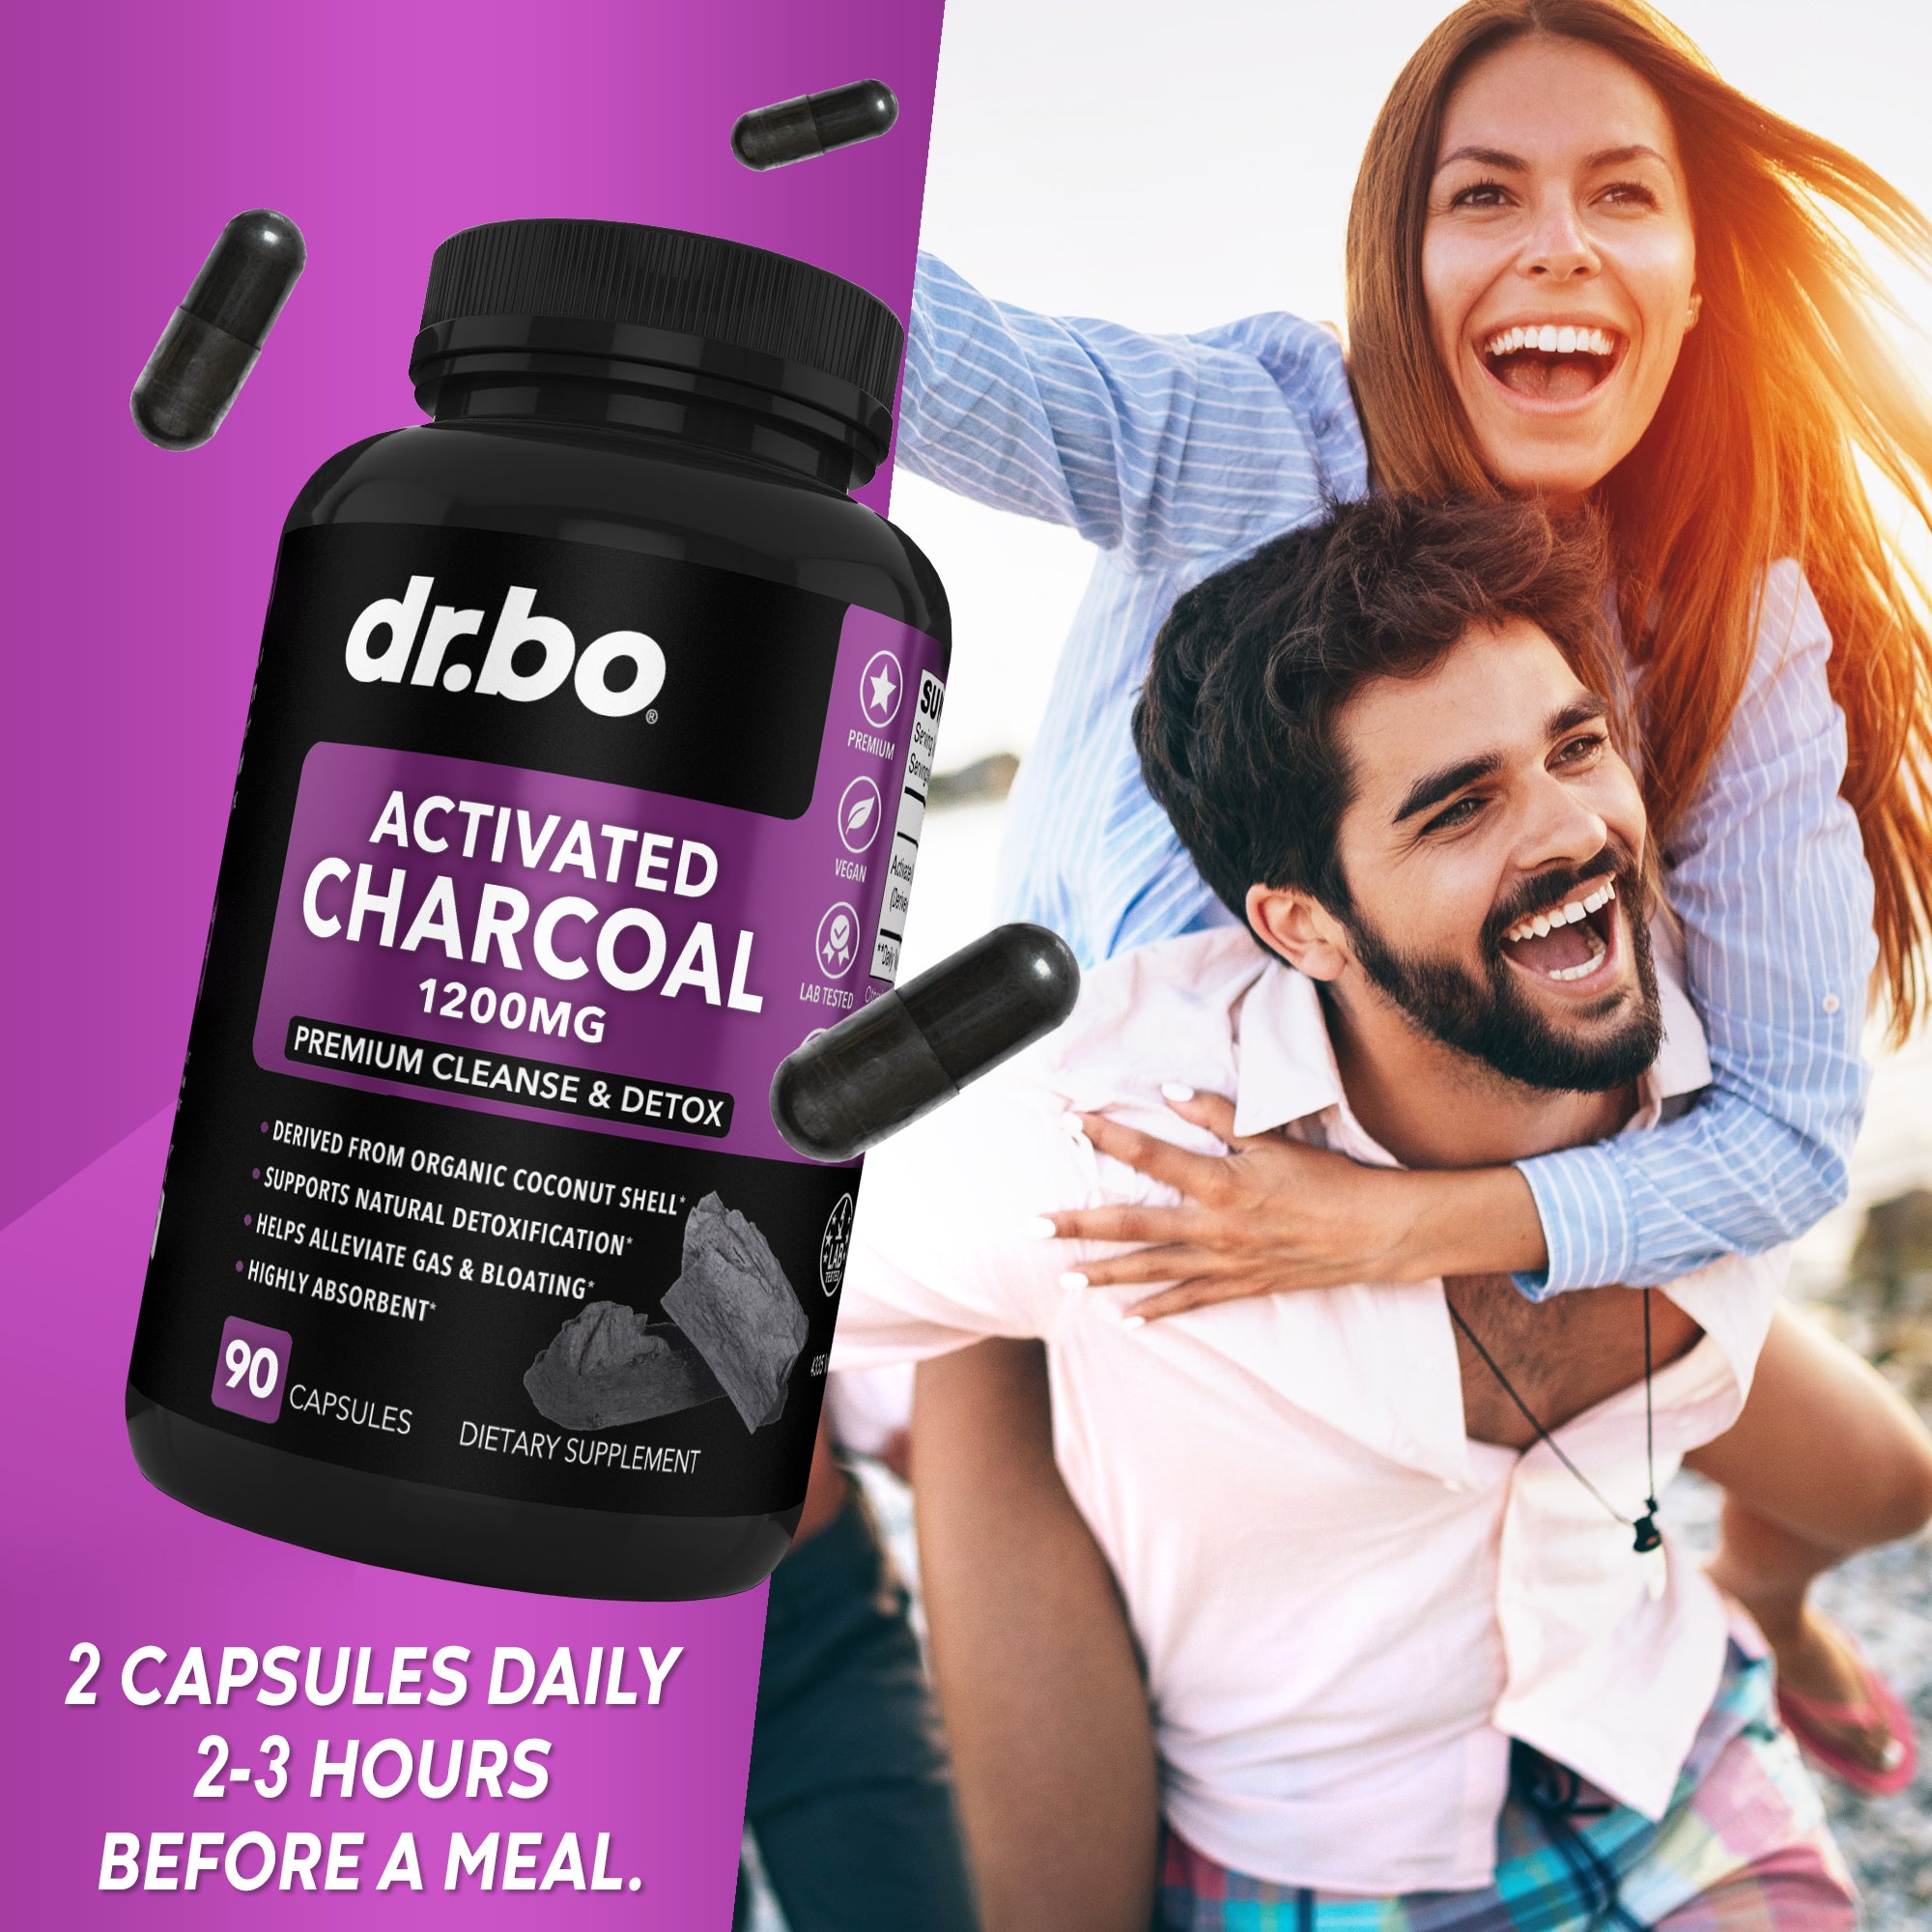 Activated Charcoal 1200mg